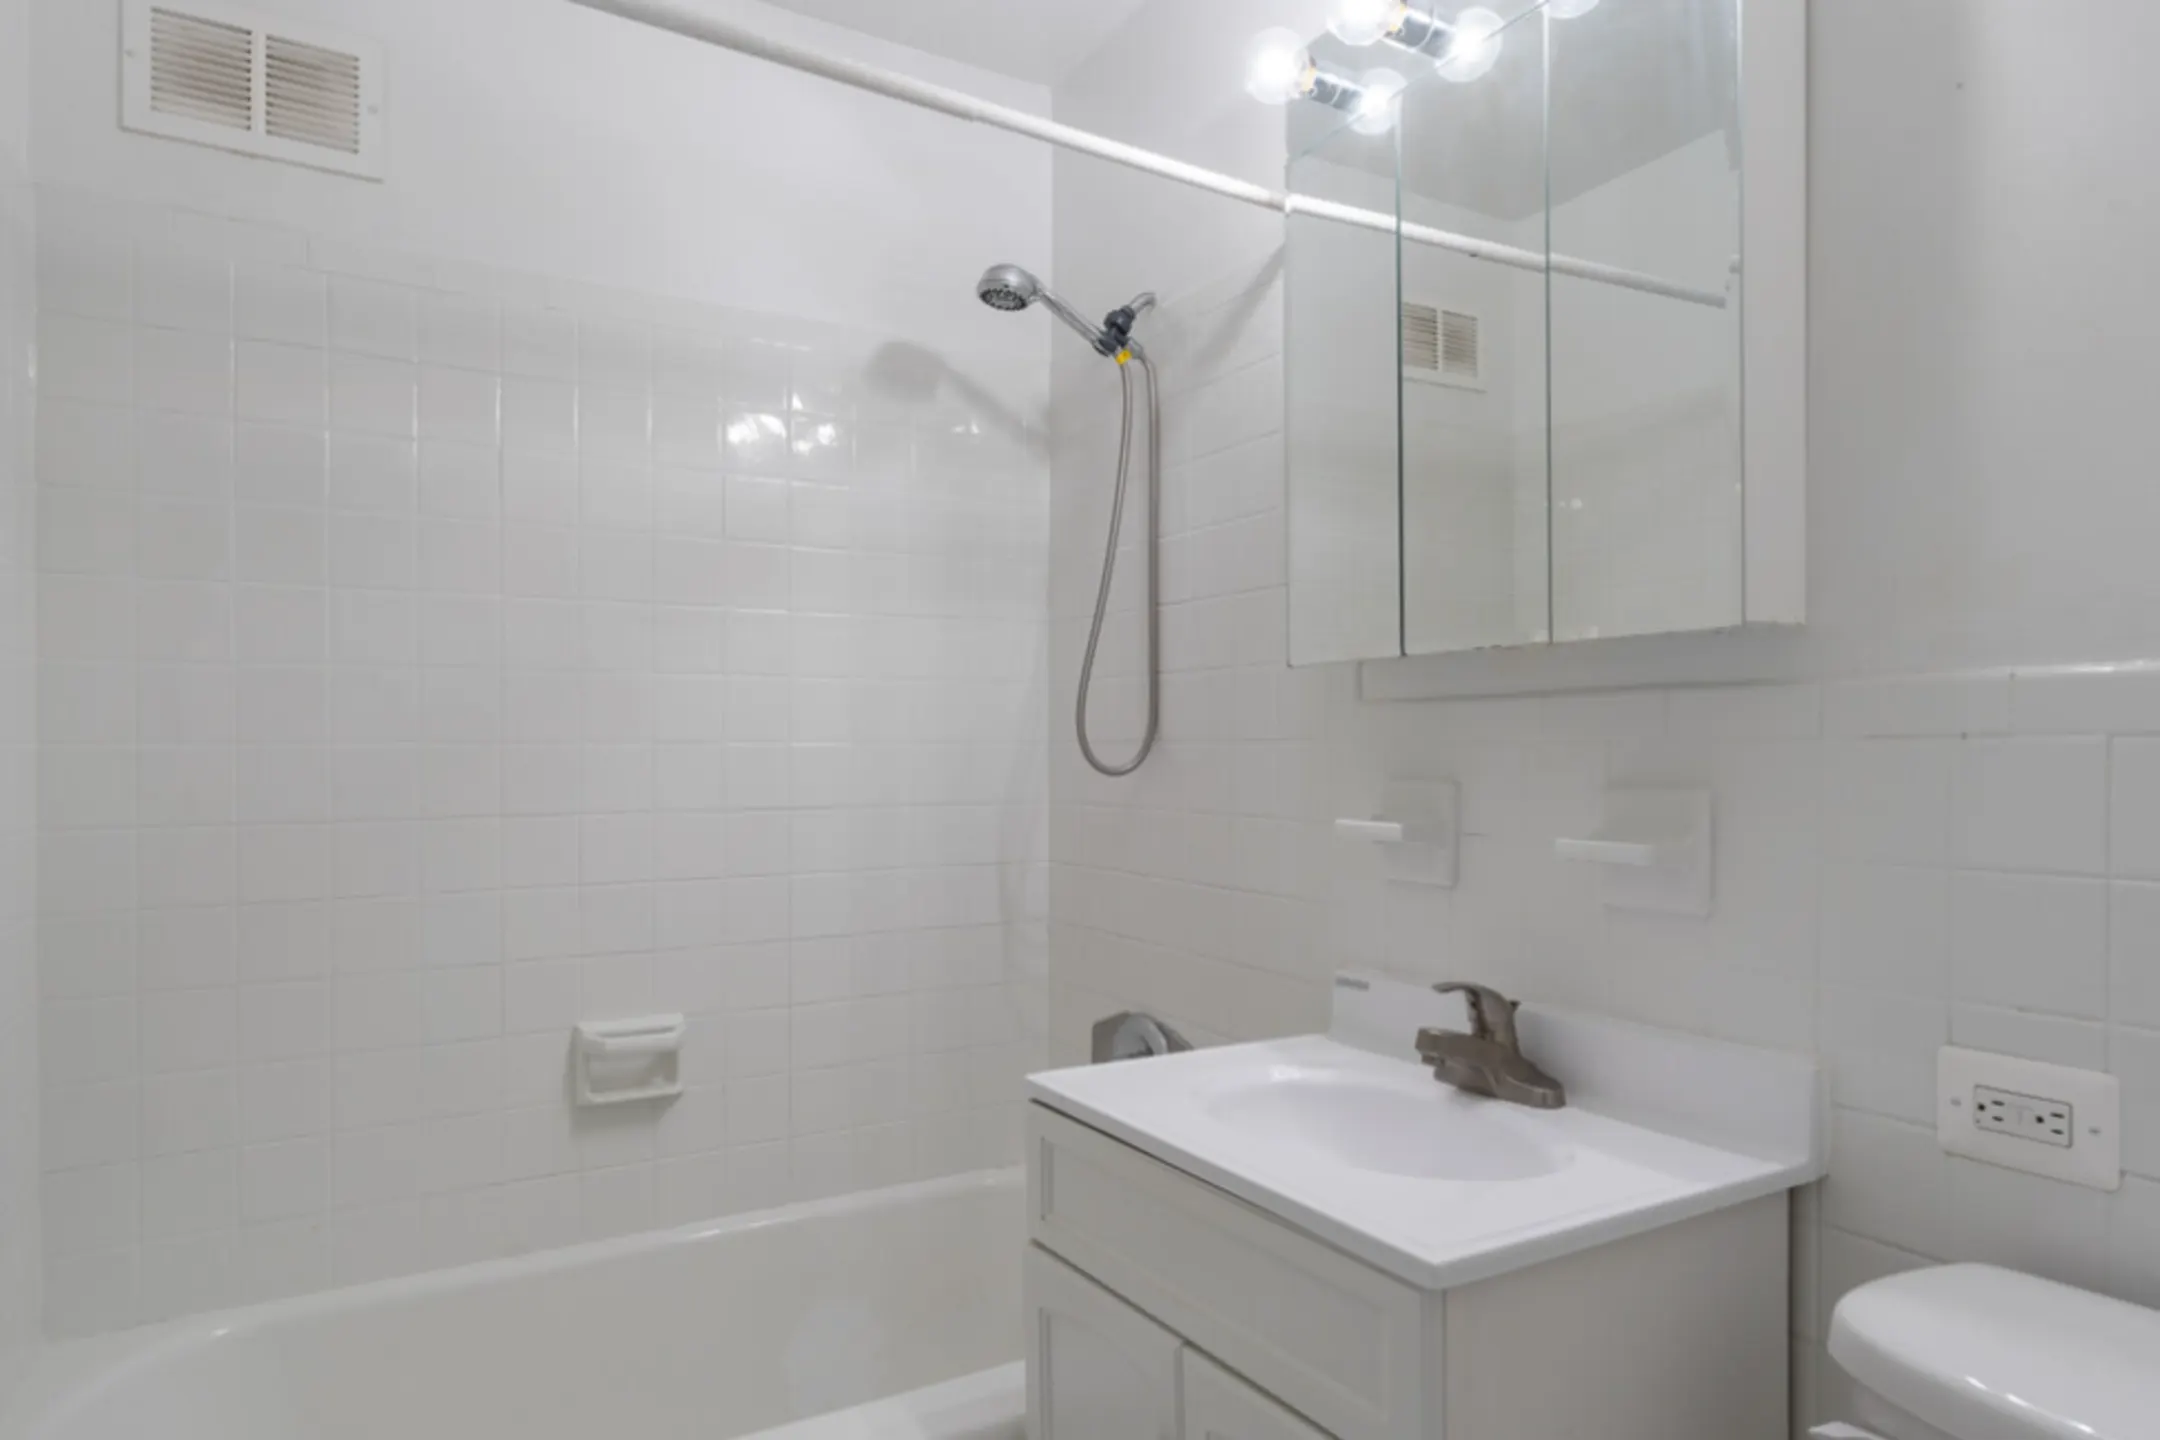 Bathroom - Courtside Square Apartments and Suites - King of Prussia, PA